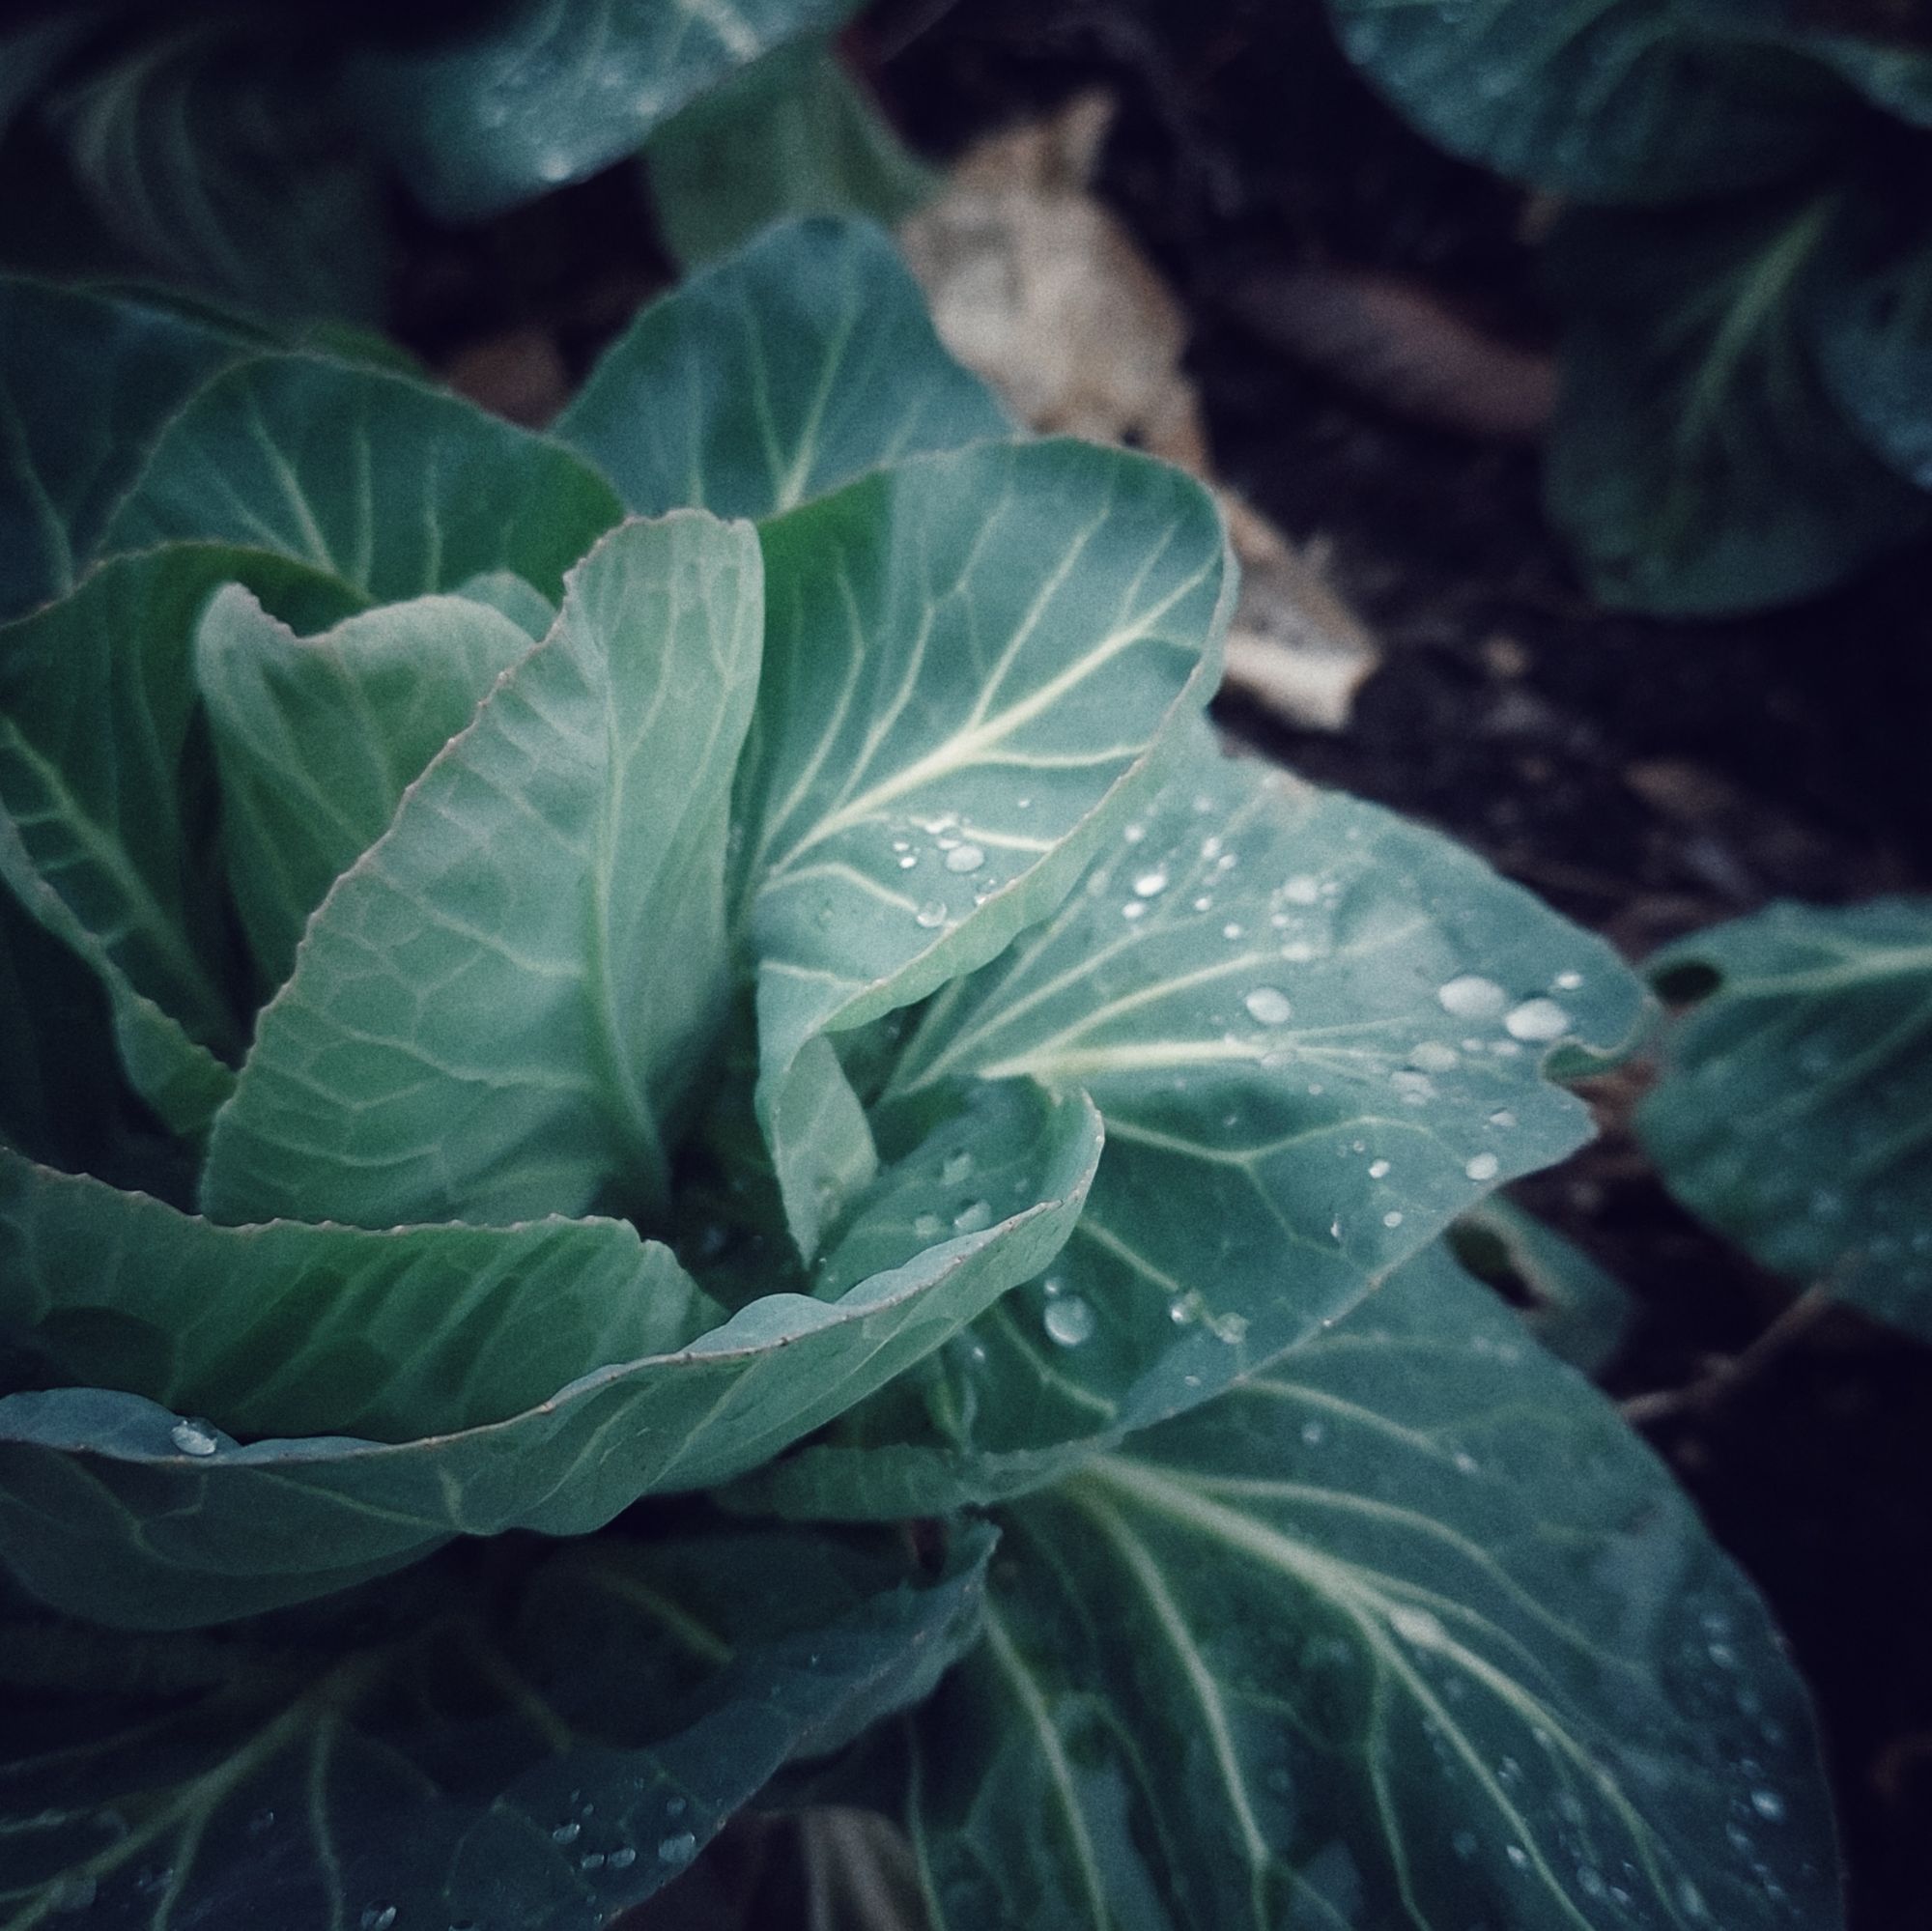 Cabbage leaves with drops of water on it.